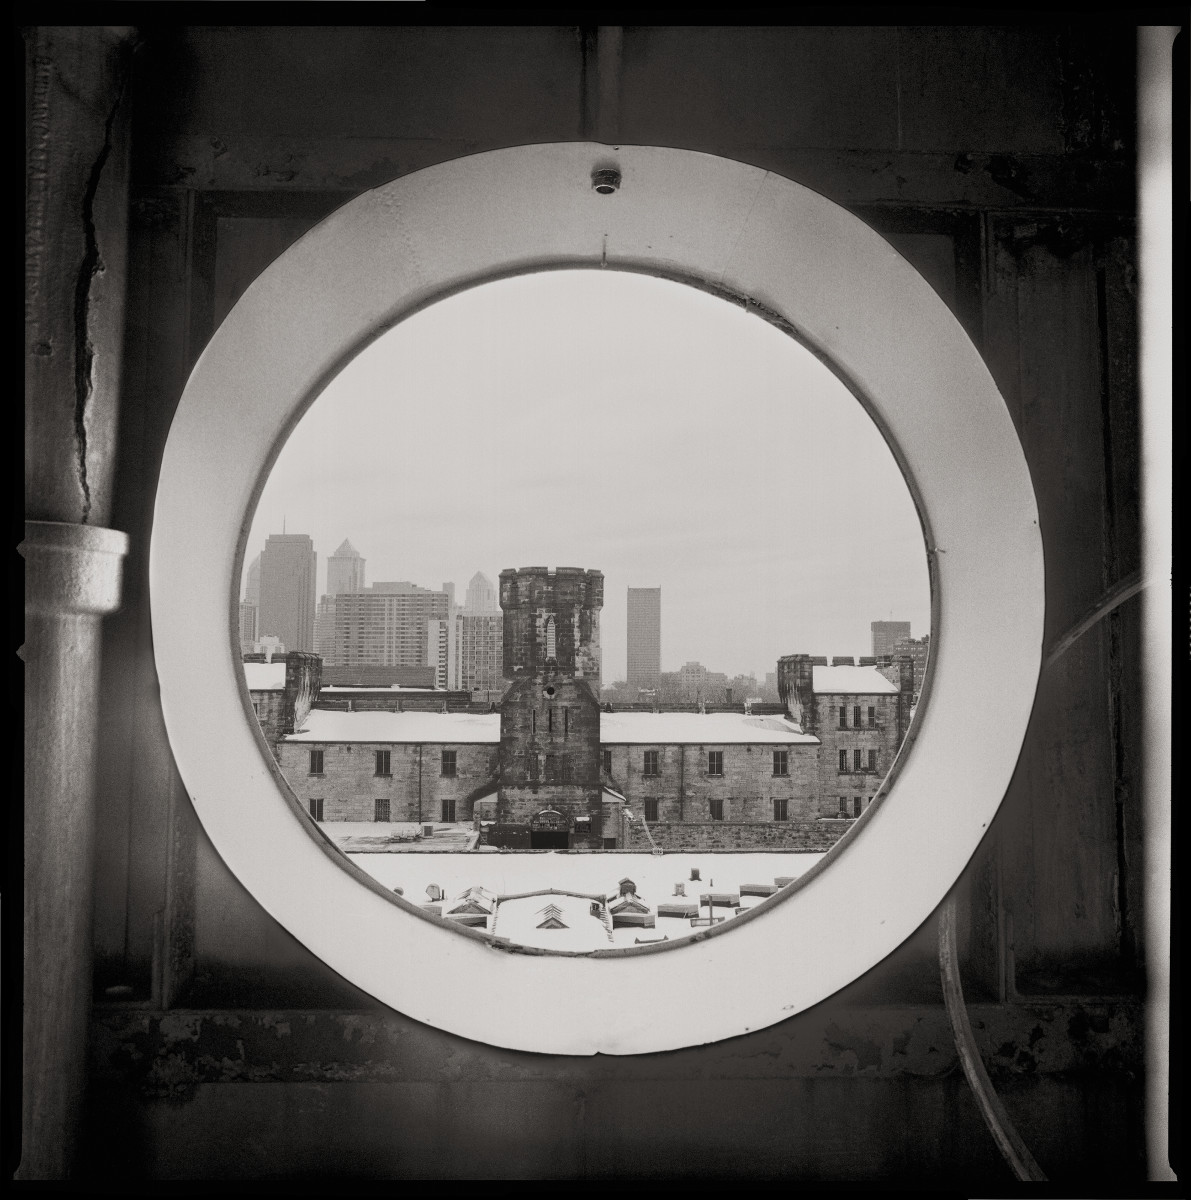 View from the Guard Tower by Eric T. Kunsman  Image: ID: A black and white image shows a view through a circular window.  A wing of the compound is visible with a tower in the center.  In the background is the Philadelphia skyline.